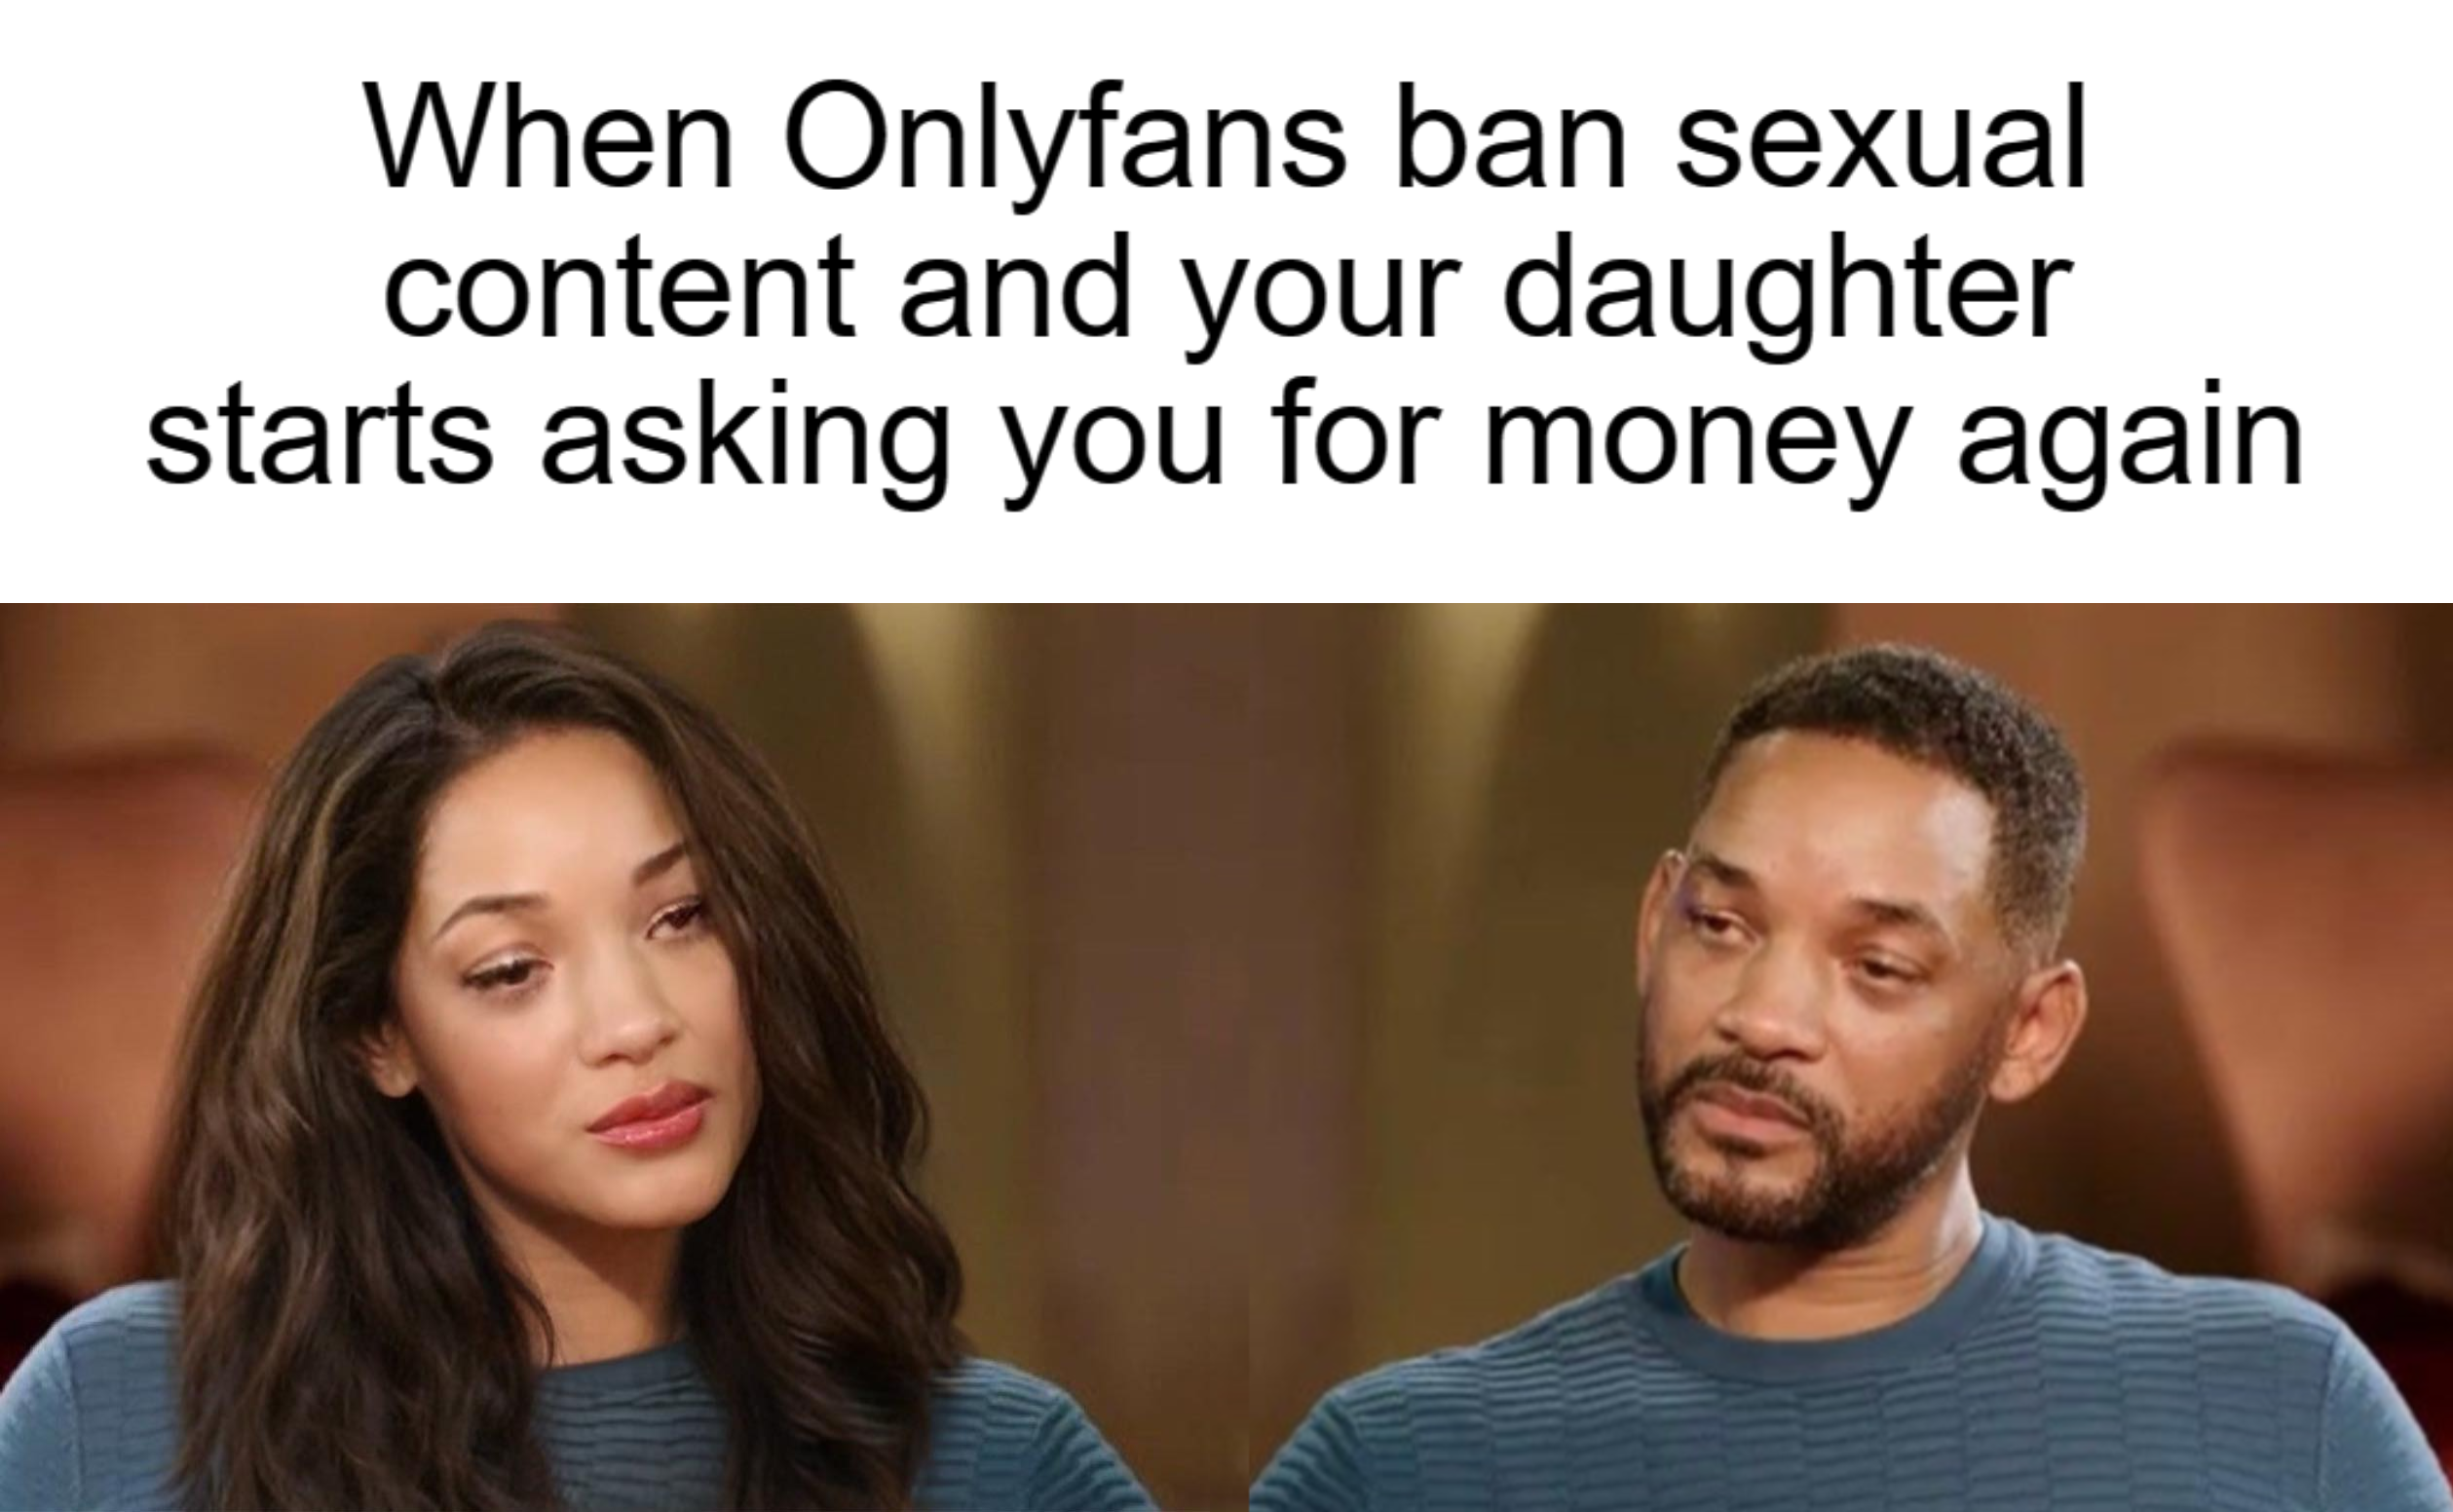 conversation - When Onlyfans ban sexual content and your daughter starts asking you for money again